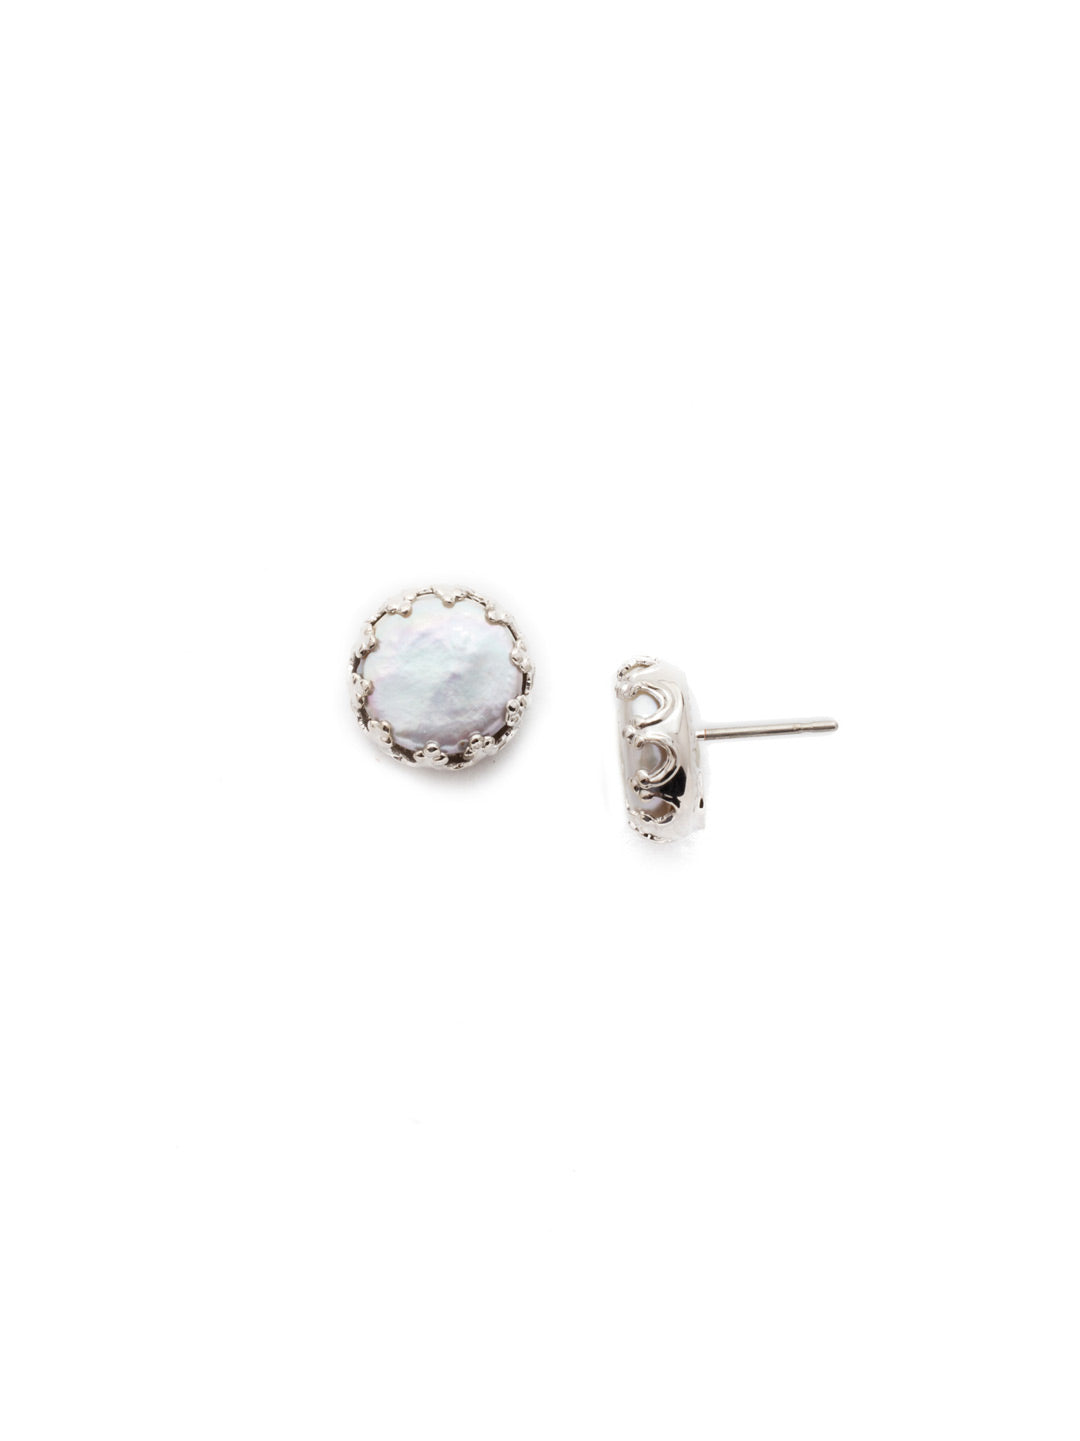 Isabella Stud Earrings - EEC15RHPLP - <p>Cute as a button! These post earrings feature a circular button pearl inside a decorative metal setting. From Sorrelli's Polished Pearl collection in our Palladium Silver-tone finish.</p>